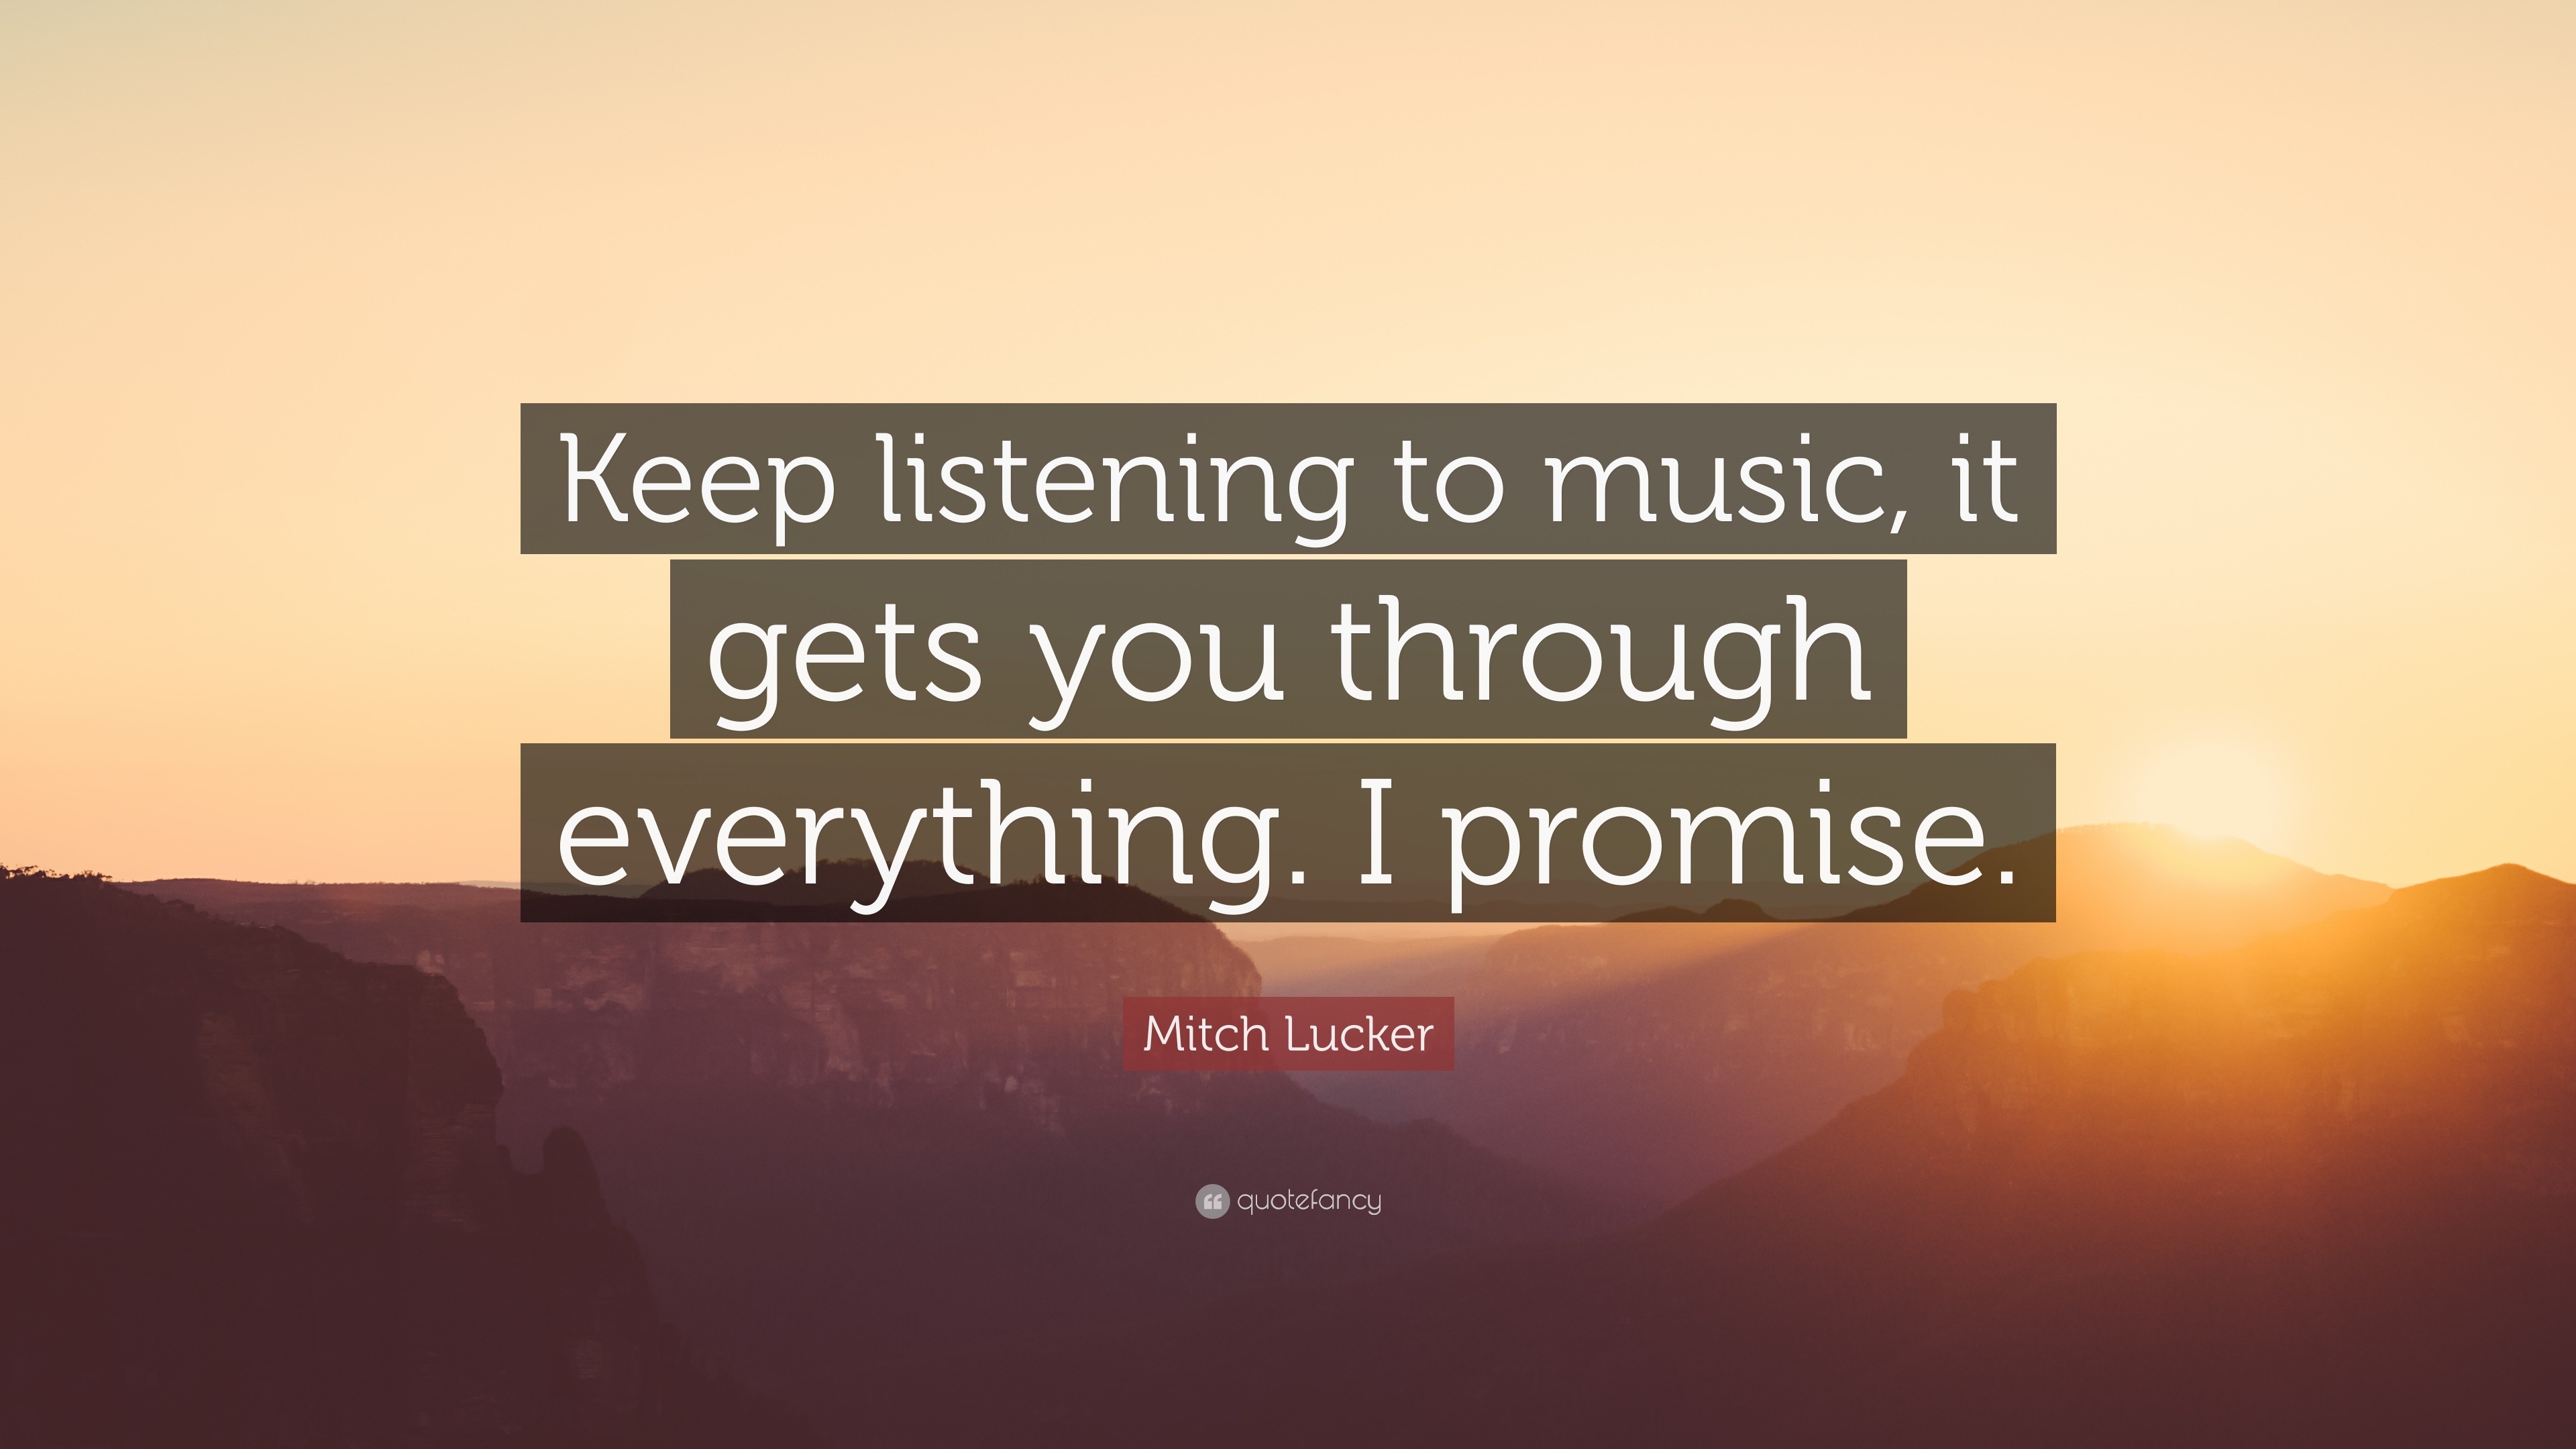 Mitch Lucker Quotes Keep Listening To Music